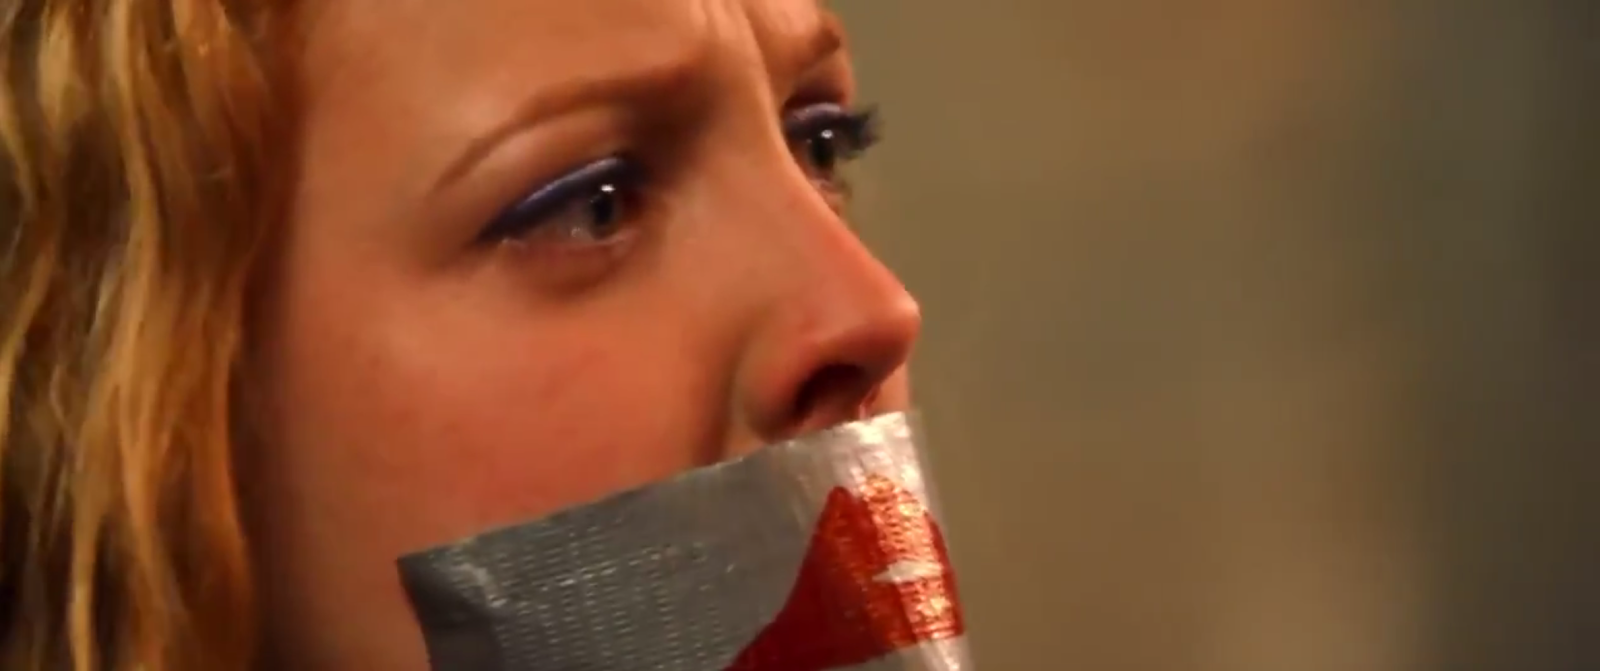 Tape Gagged (Charlie's Angels). 